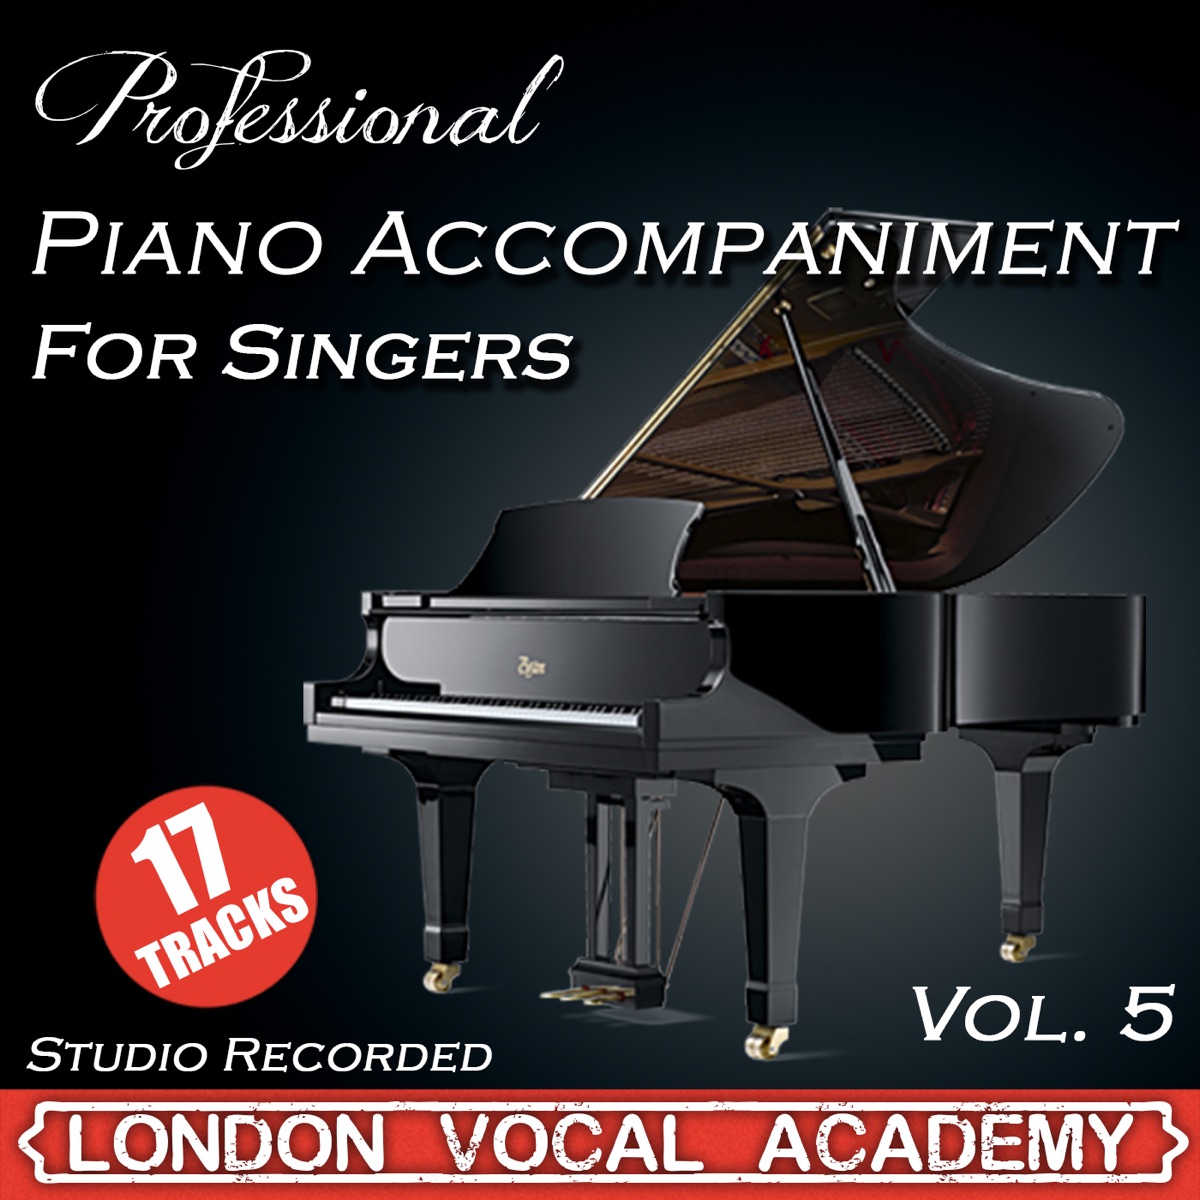 Professional Piano Accompaniment For Singers, Vol. 4 (Karaoke Backing Track)  by London Vocal Academy on Apple Music